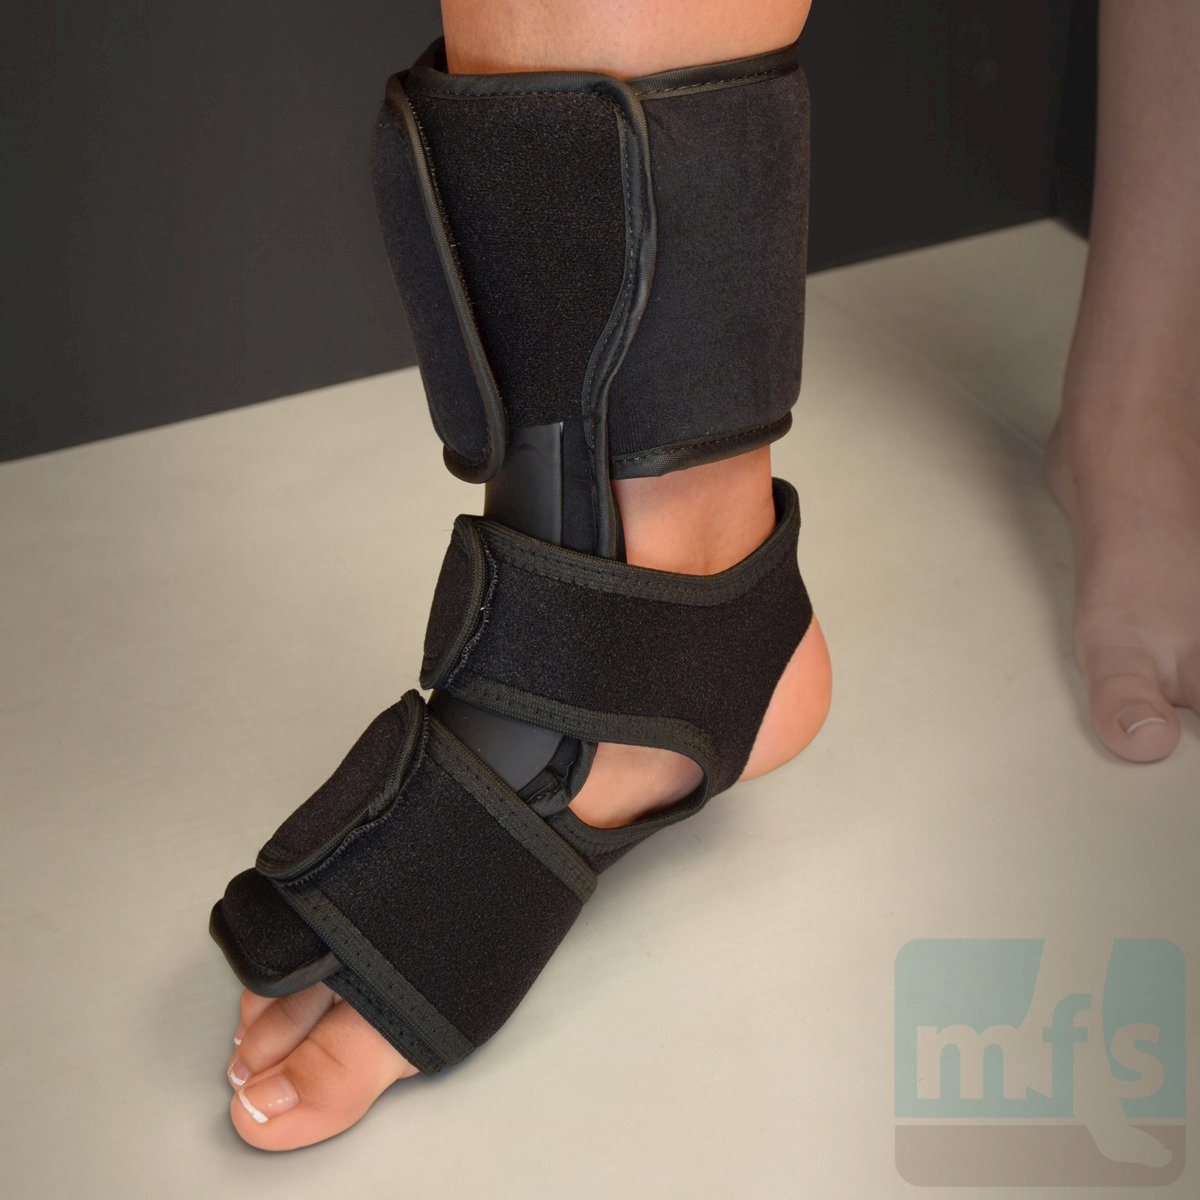 What To Know About Night Splints for Plantar Fasciitis - Mountain View